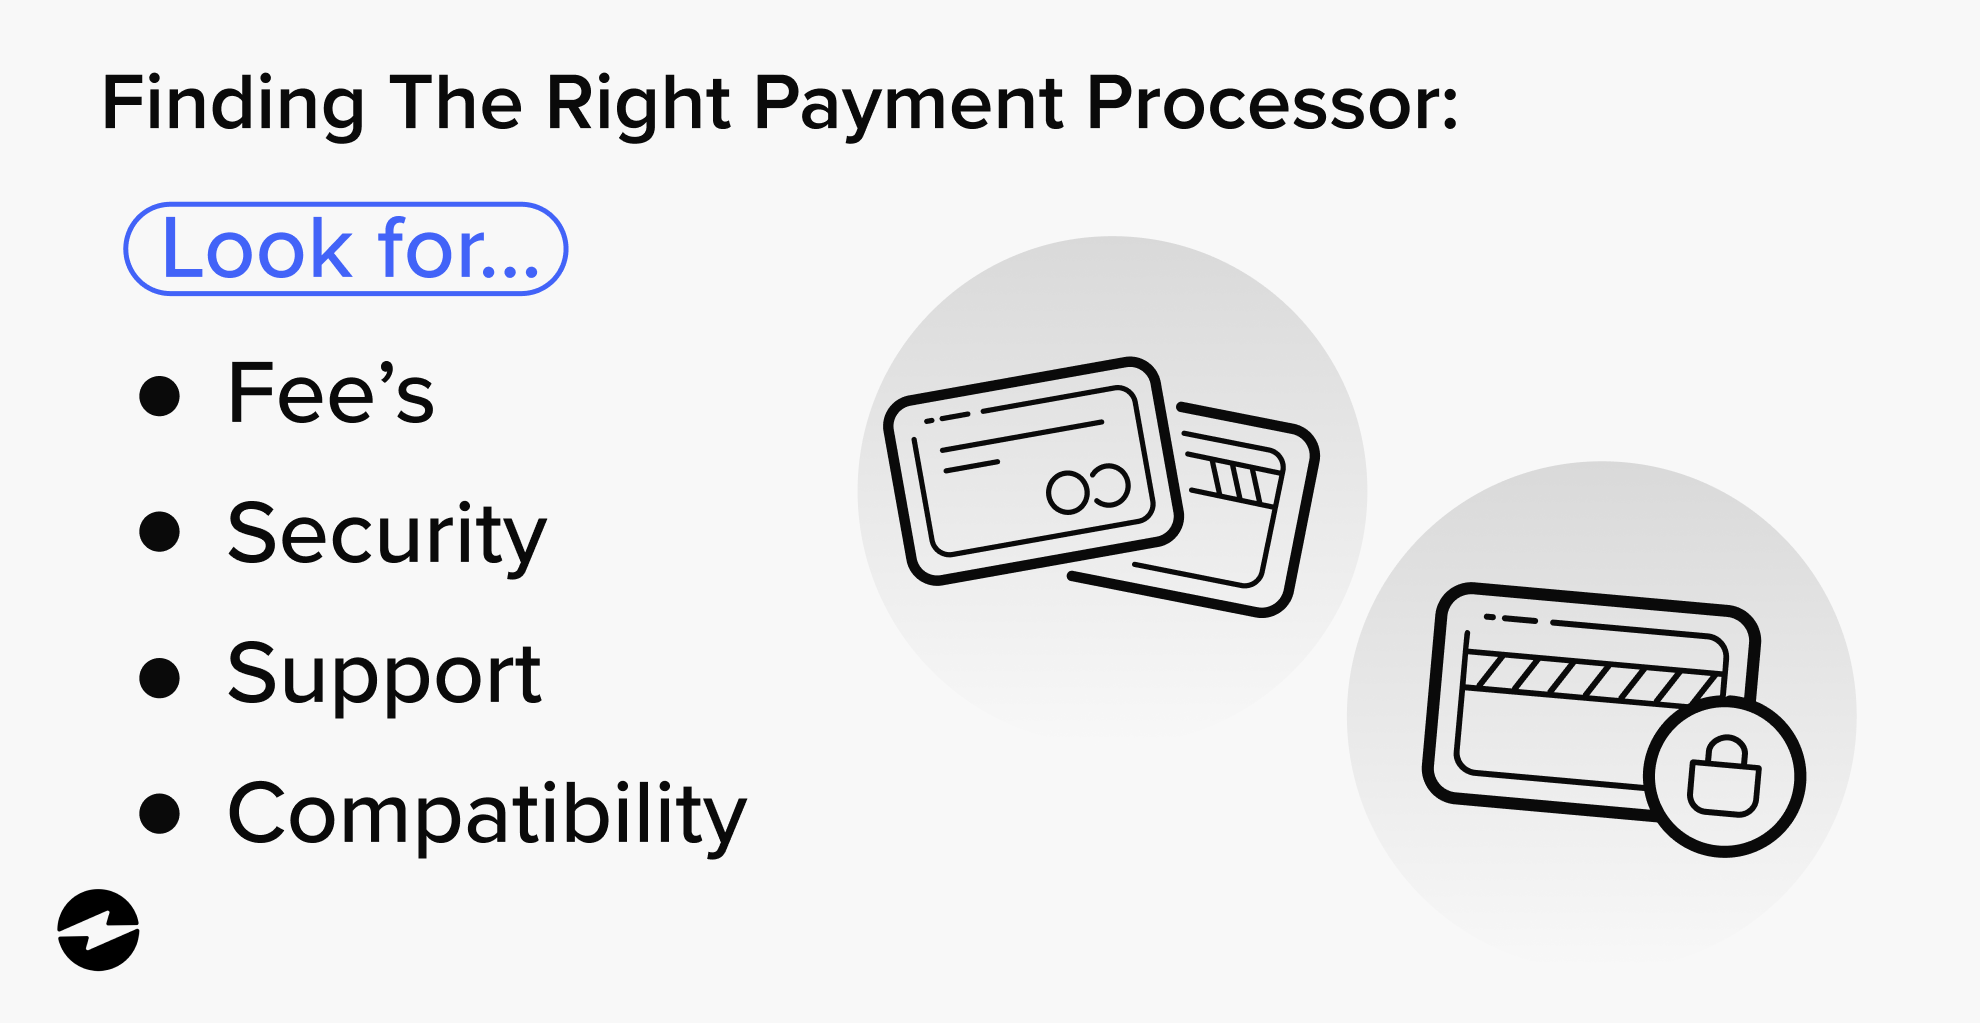 Find the right payment processor